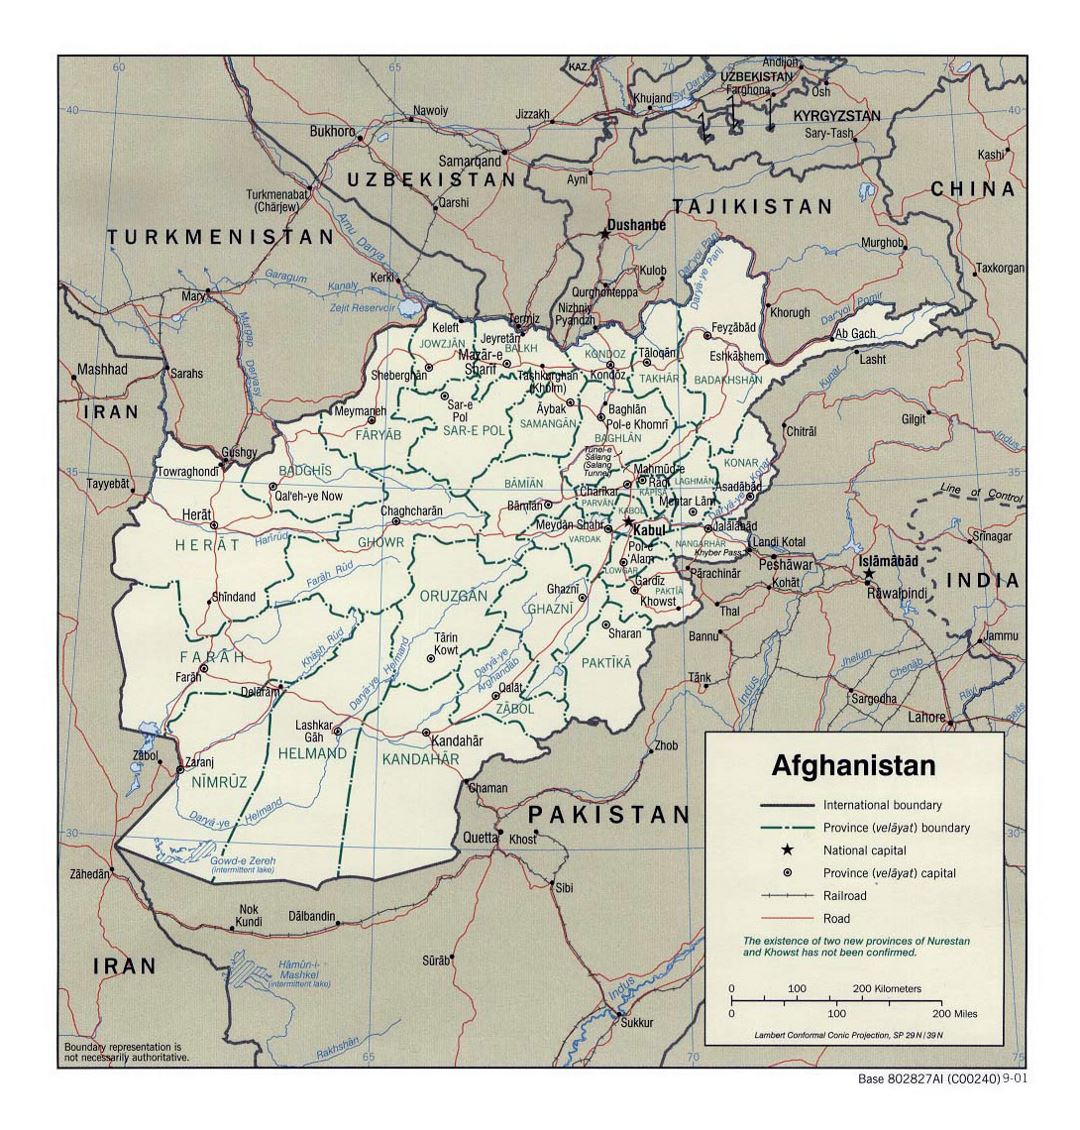 Detailed political and administrative map of Afghanistan - 2001